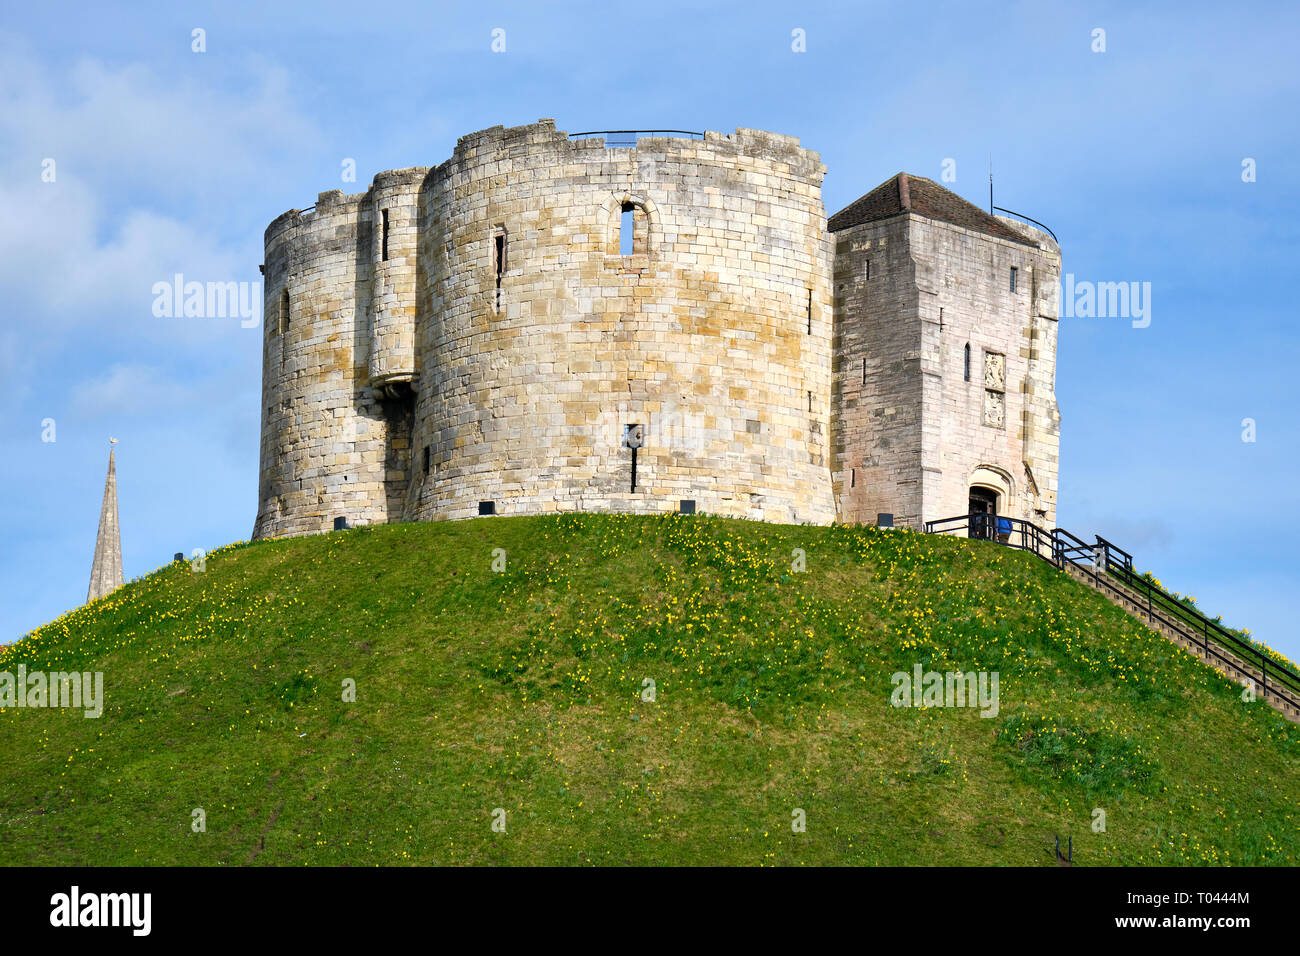 The historic Cliffords Tower in York, Great Britain Stock Photo